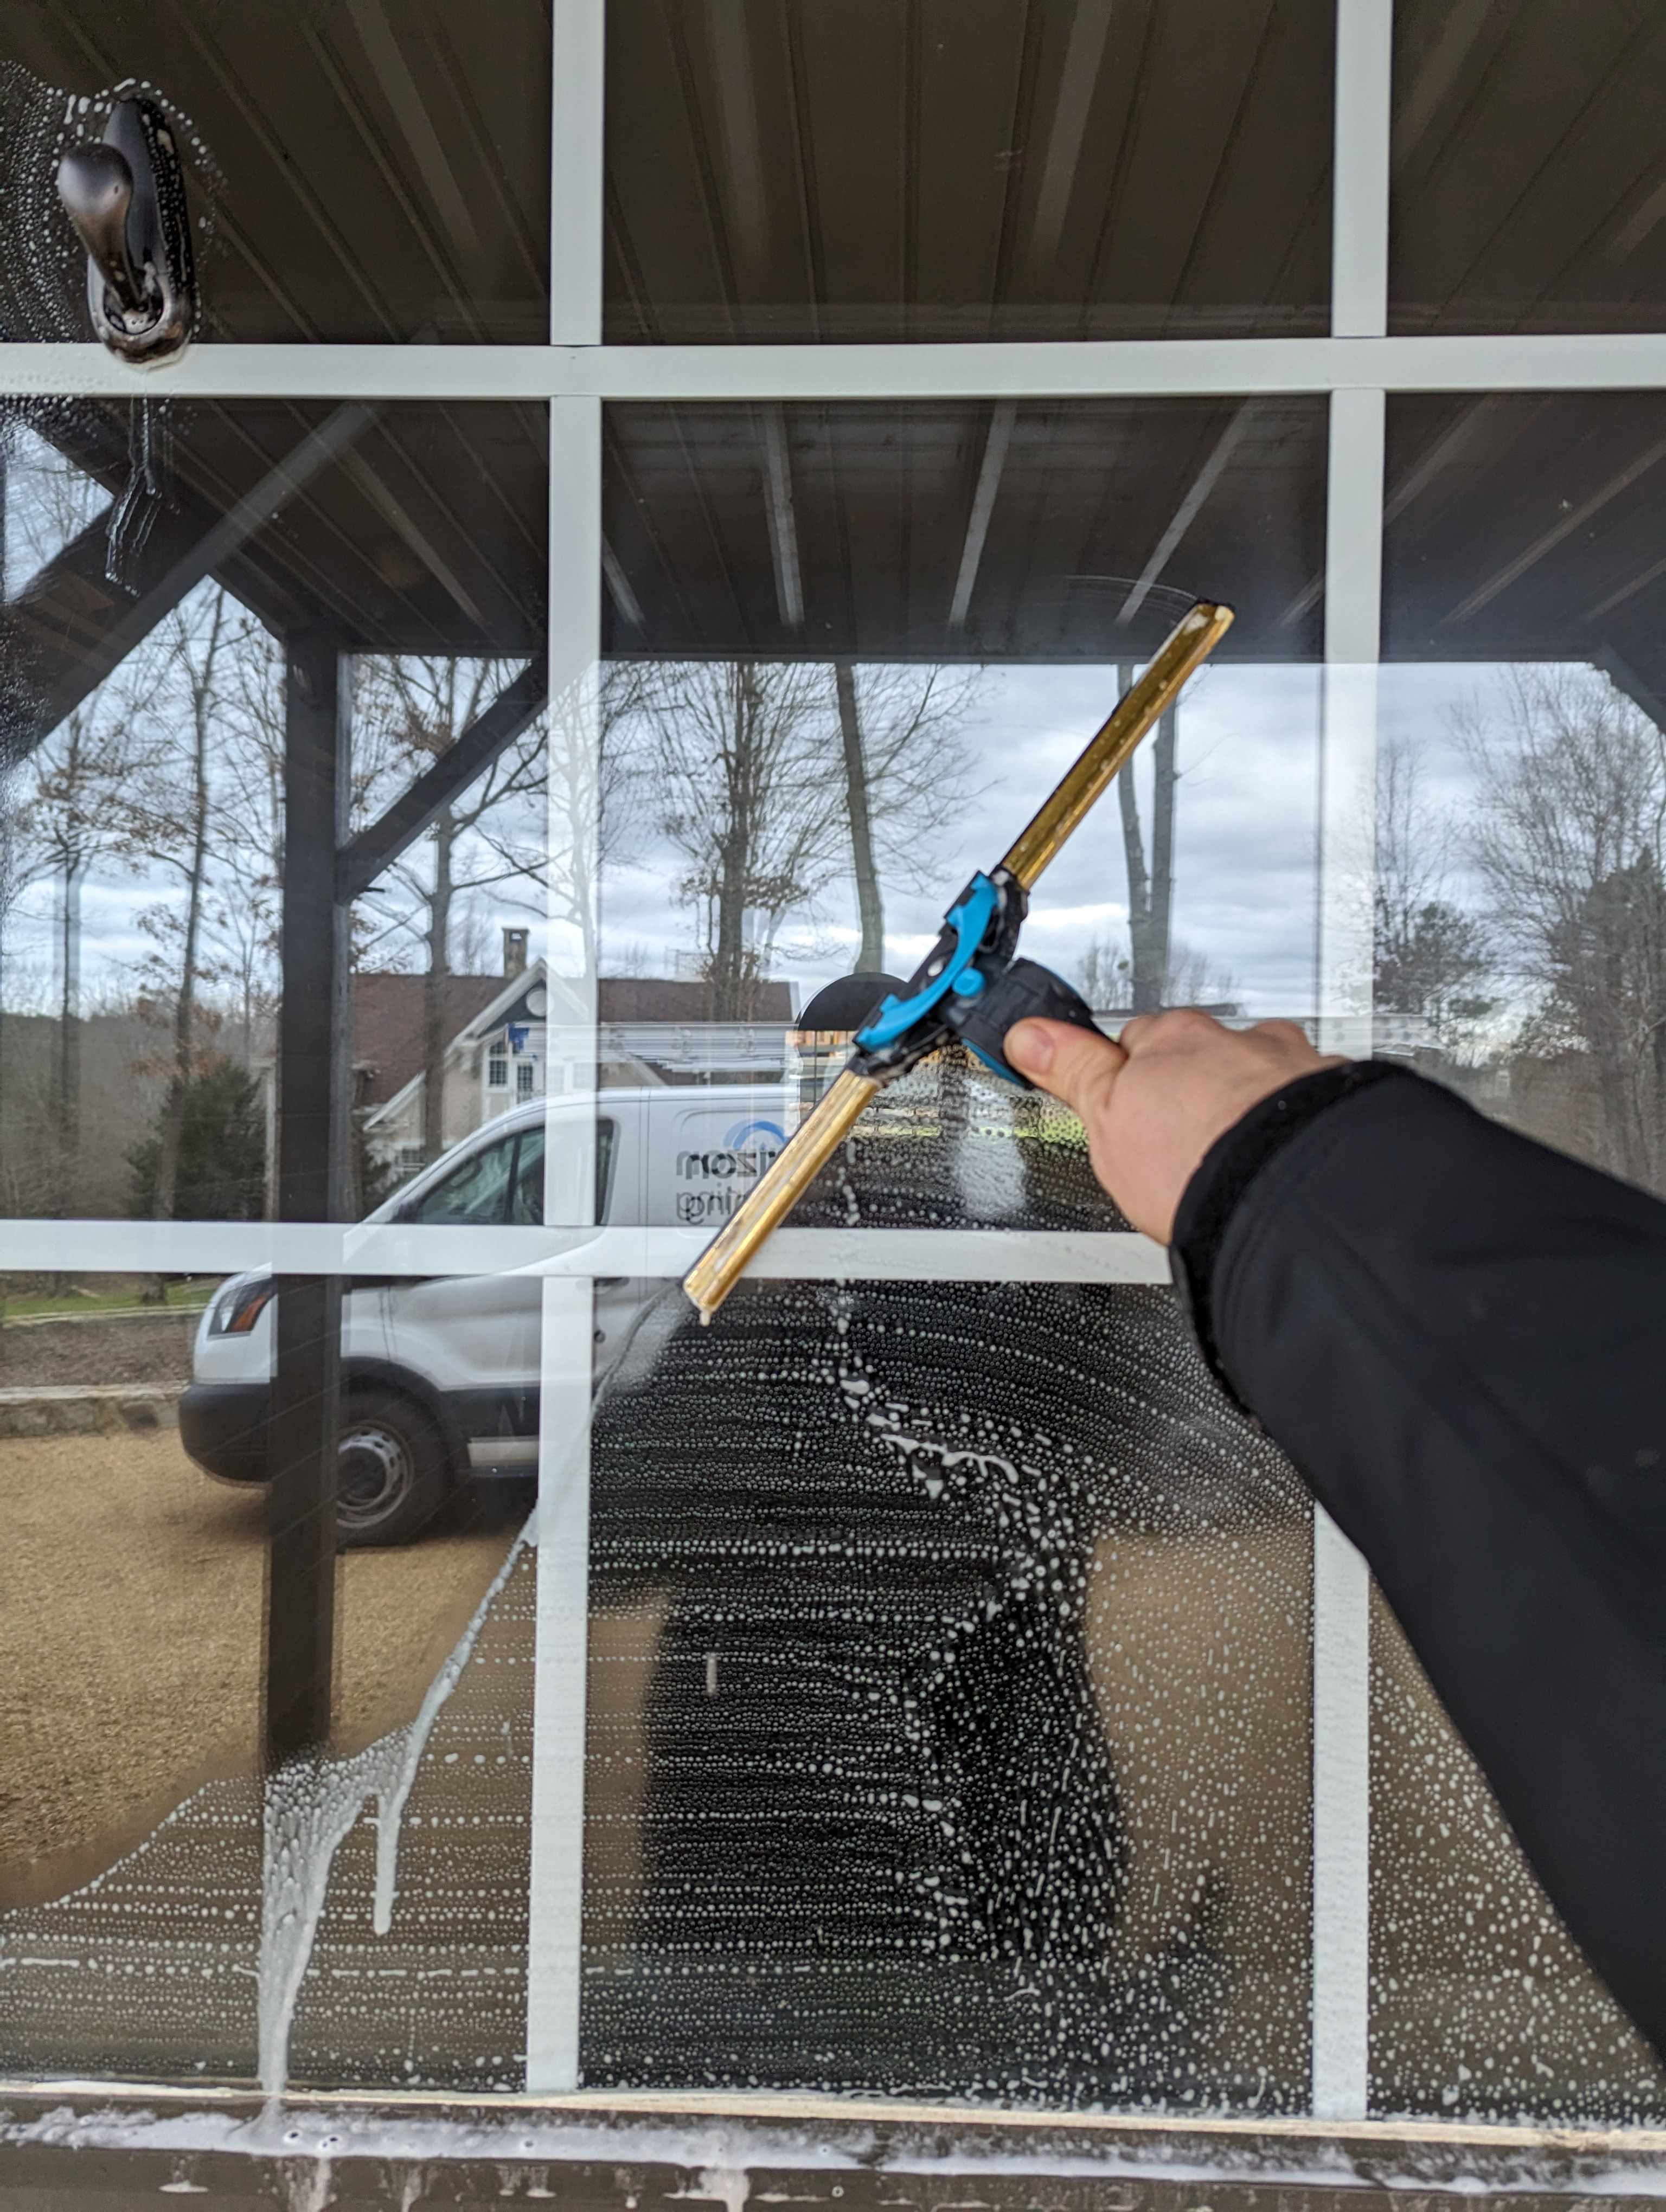 Best Quality Window Cleaning Service in Waxhaw, NC